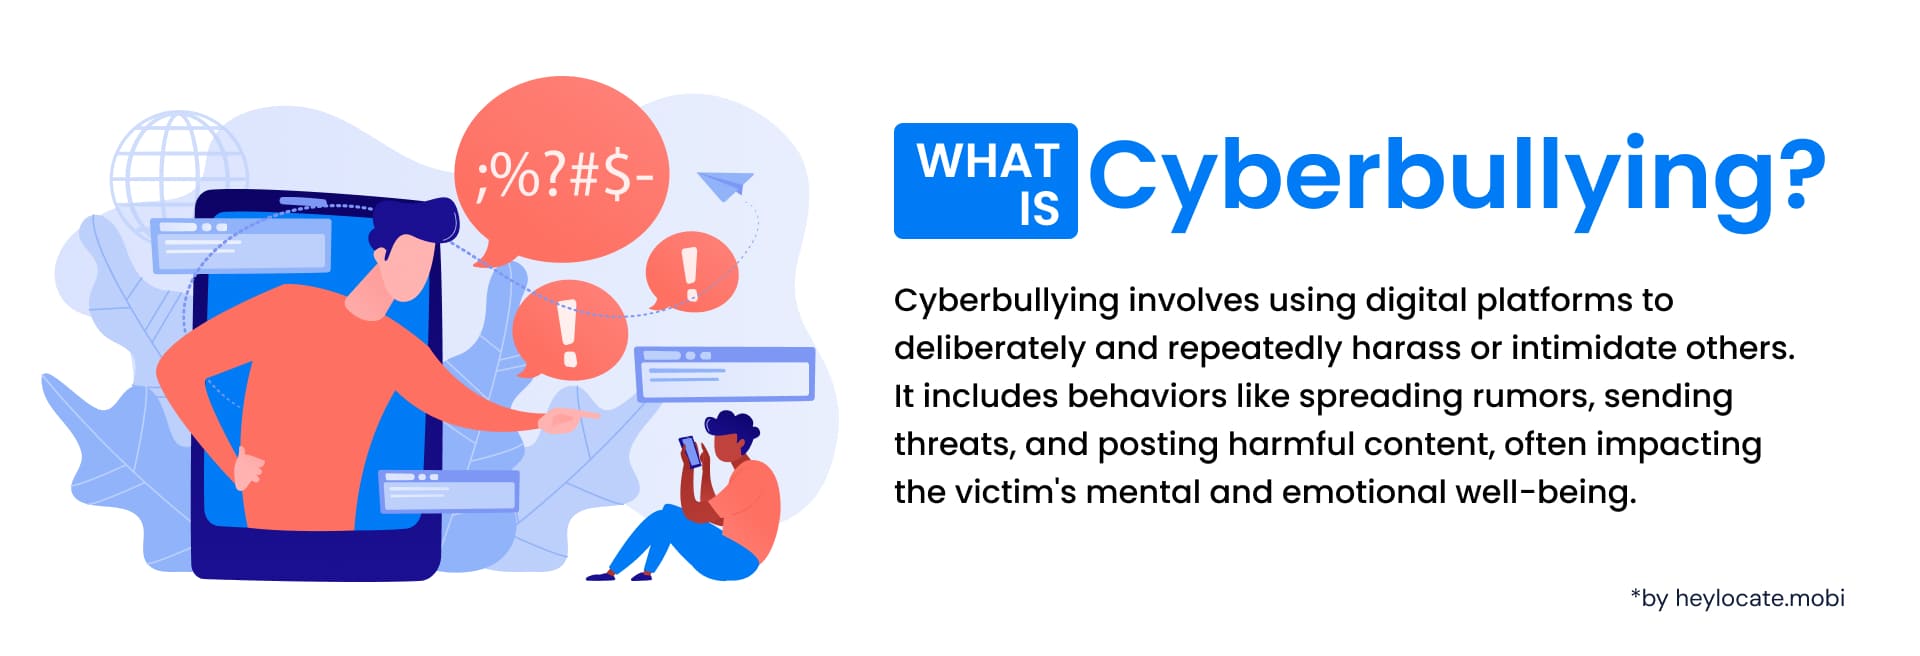 An illustration explaining "What is cyberbullying?" with an image of a figure obscuring a smaller seated person